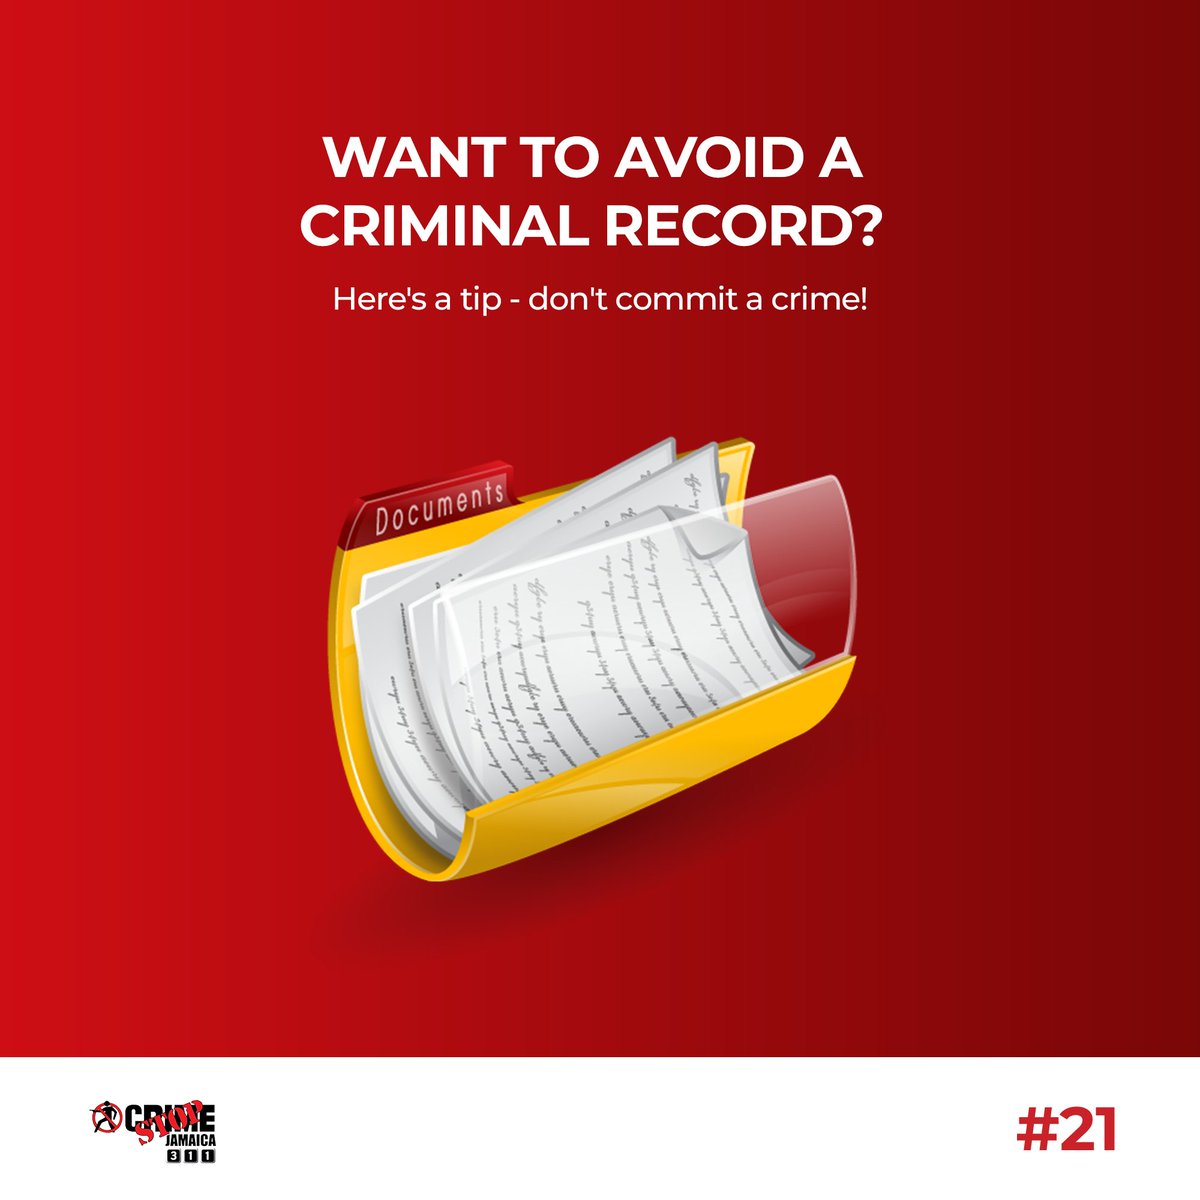 Want to avoid a criminal record? Here's a pro tip: don't commit a crime! It's as simple as that. Stay on the right side of the law and keep your record clean. #CrimeStop #StayLegal